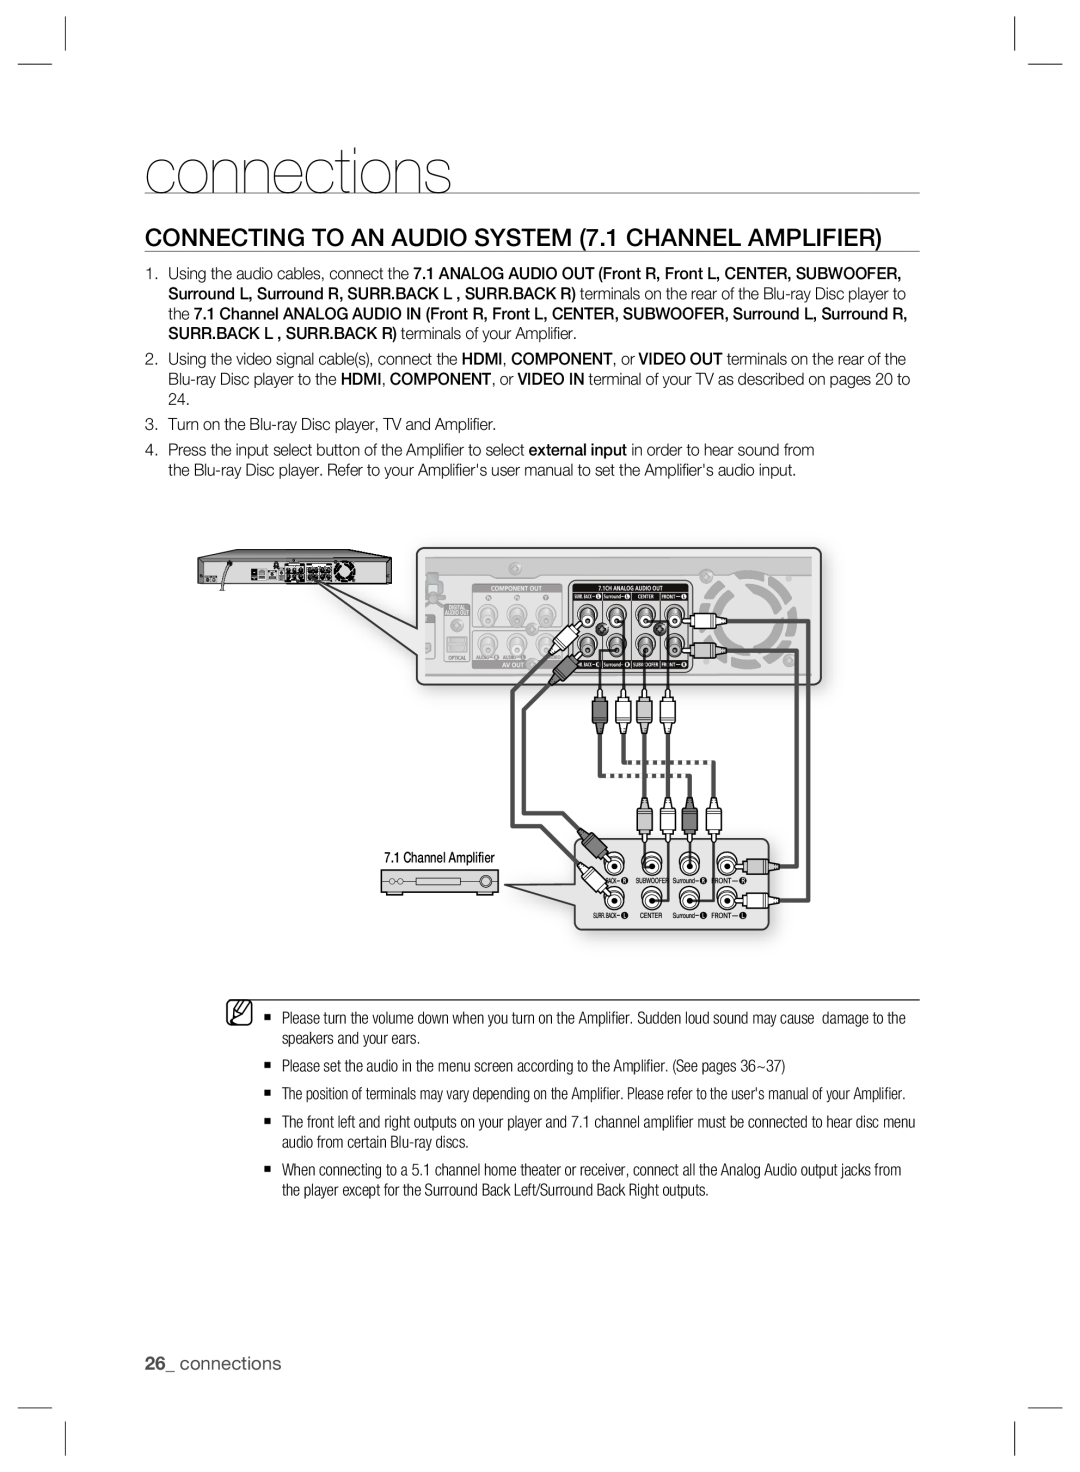 Samsung BD-P2500/XEE, BD-P2500/EDC, BD-P2500/XEF manual CONNECTING TO AN AUDIO SYSTEM 7.1 CHANNEL AMPLIFIER, connections 